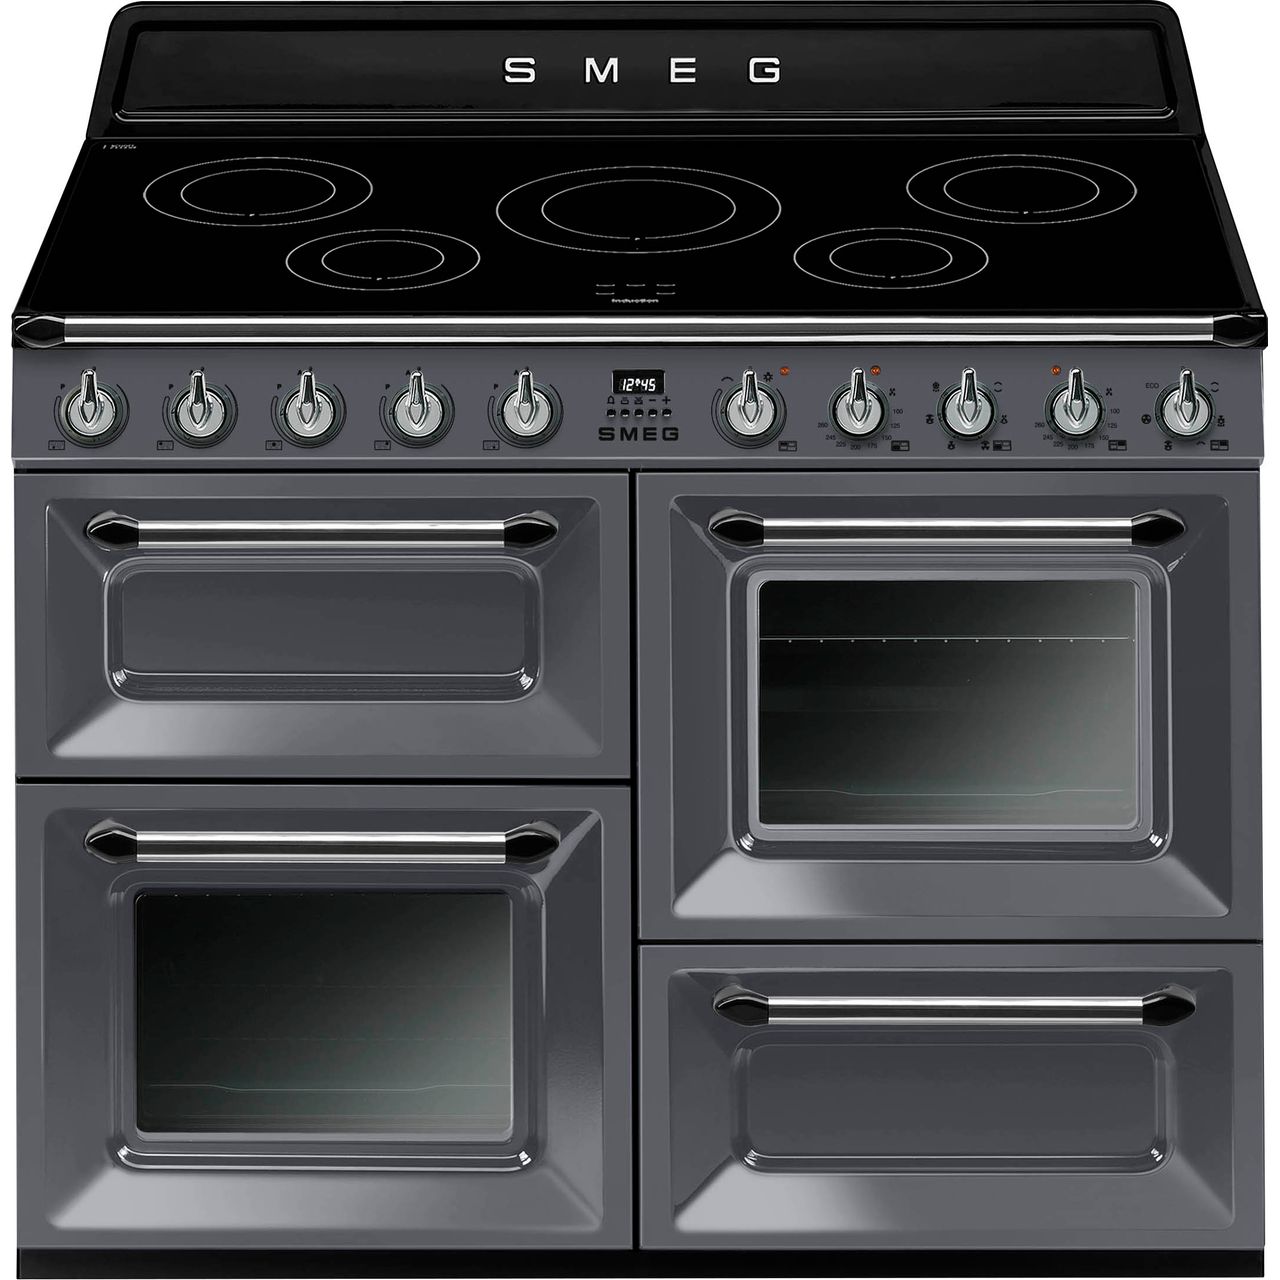 Smeg Victoria TR4110IGR 110cm Electric Range Cooker with Induction Hob Review